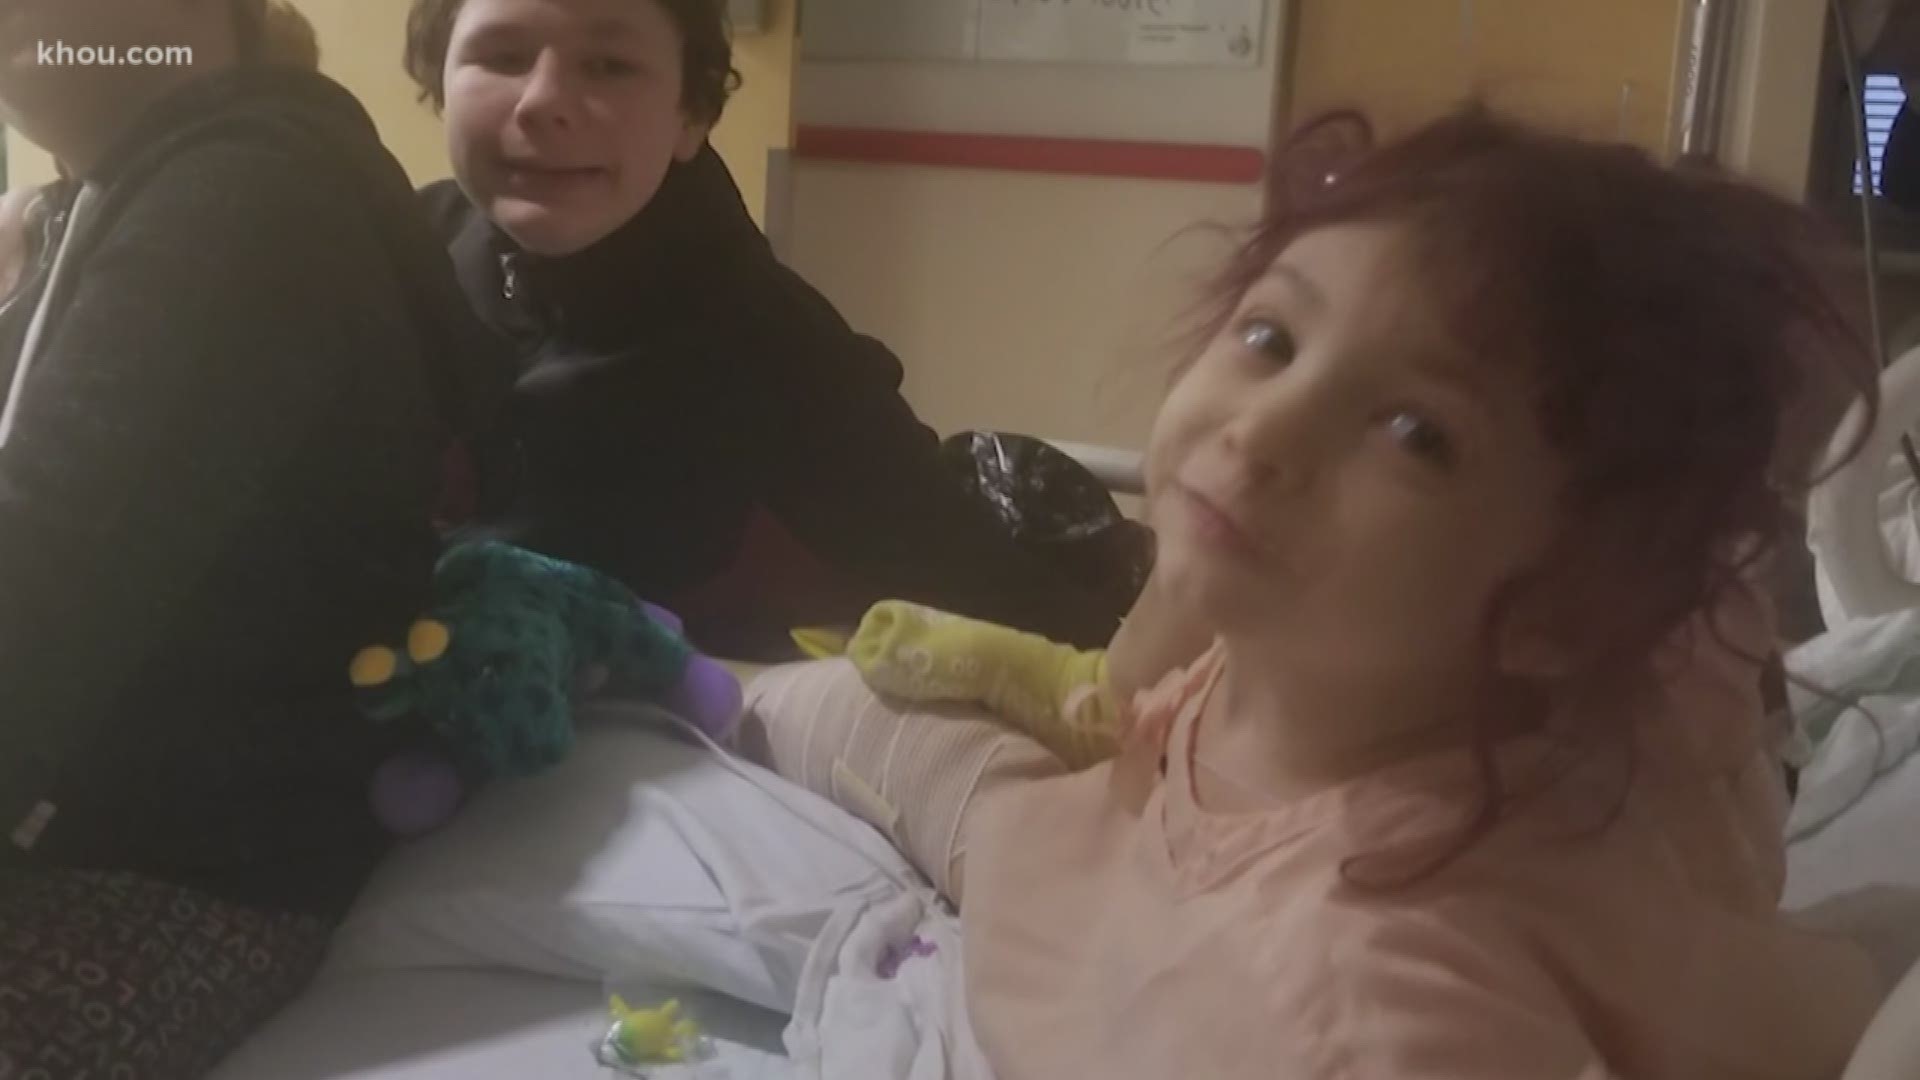 A little girl caught in the crossfire was shot in the leg during a robbery Monday night. She took her first few steps Tuesday after she endured a 3 hour surgery.